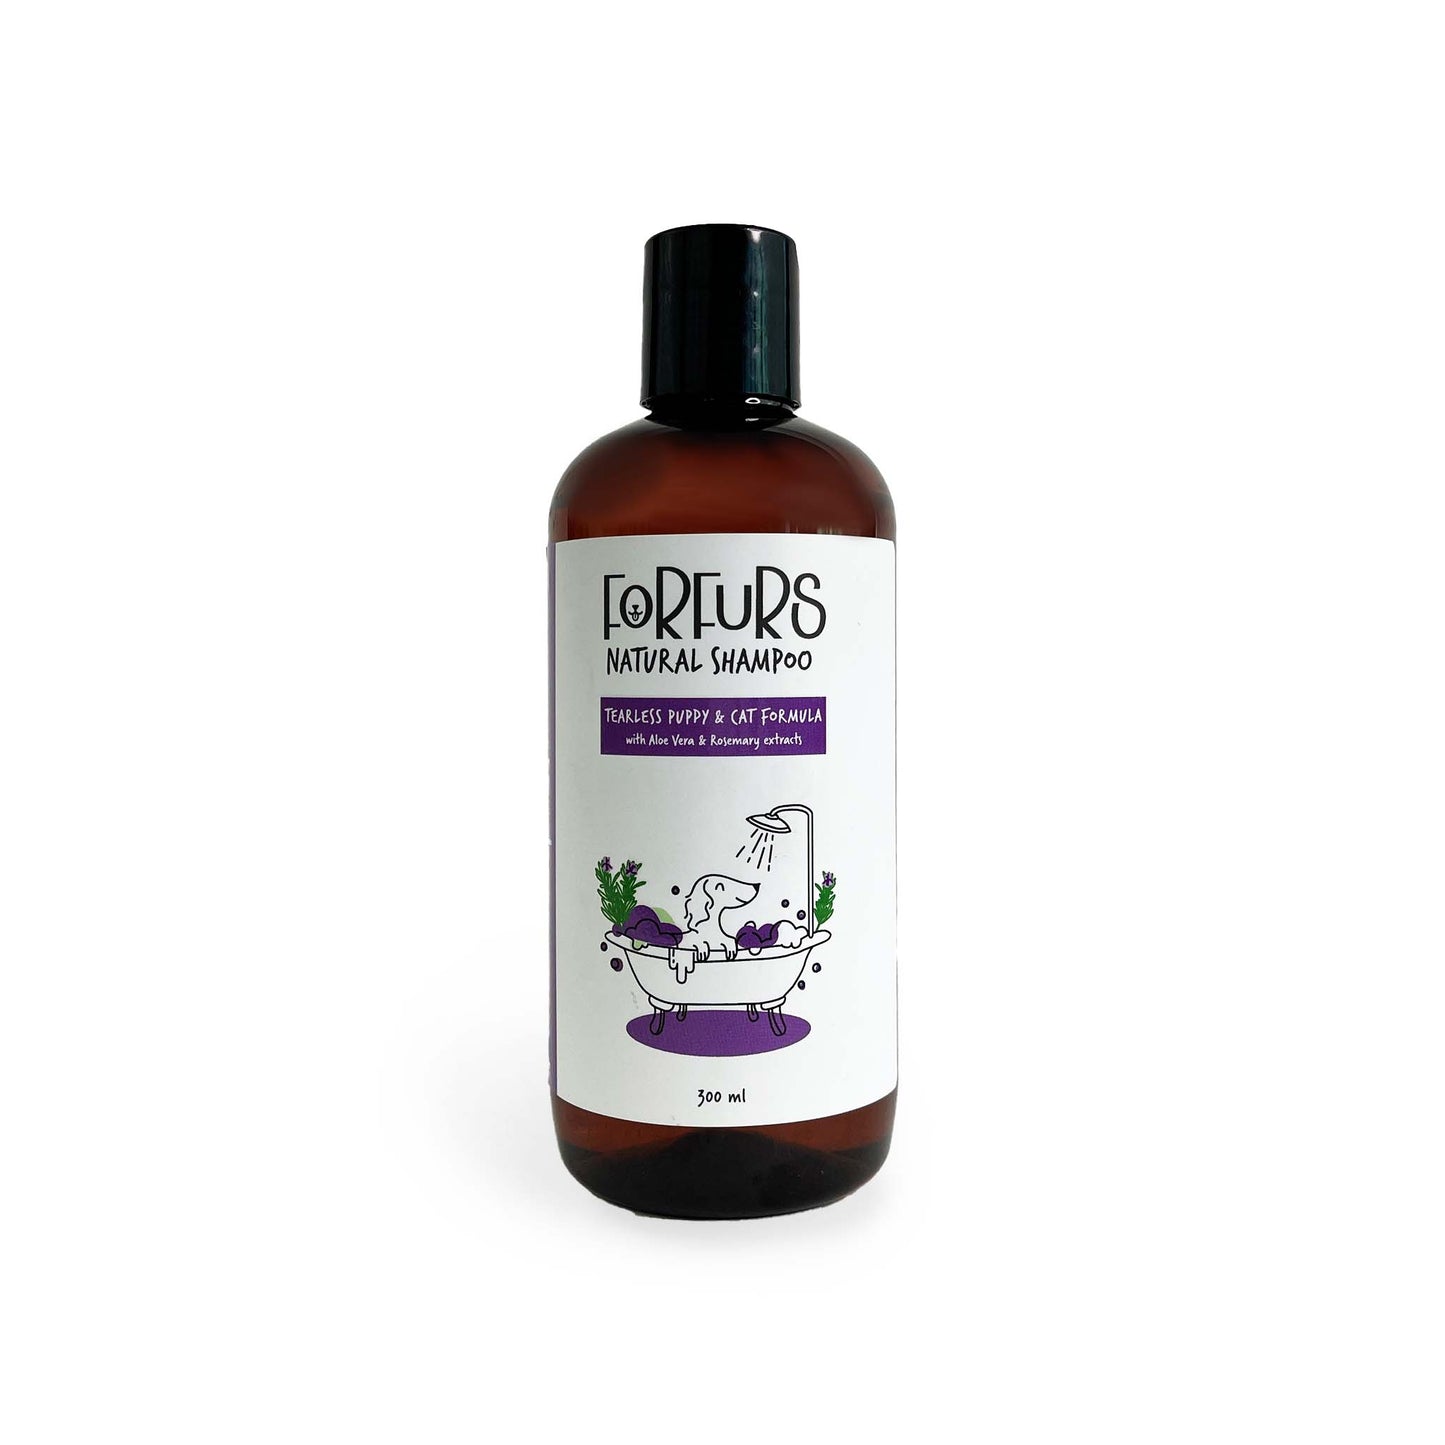 Forfurs - Tearless puppy and cat Shampoo